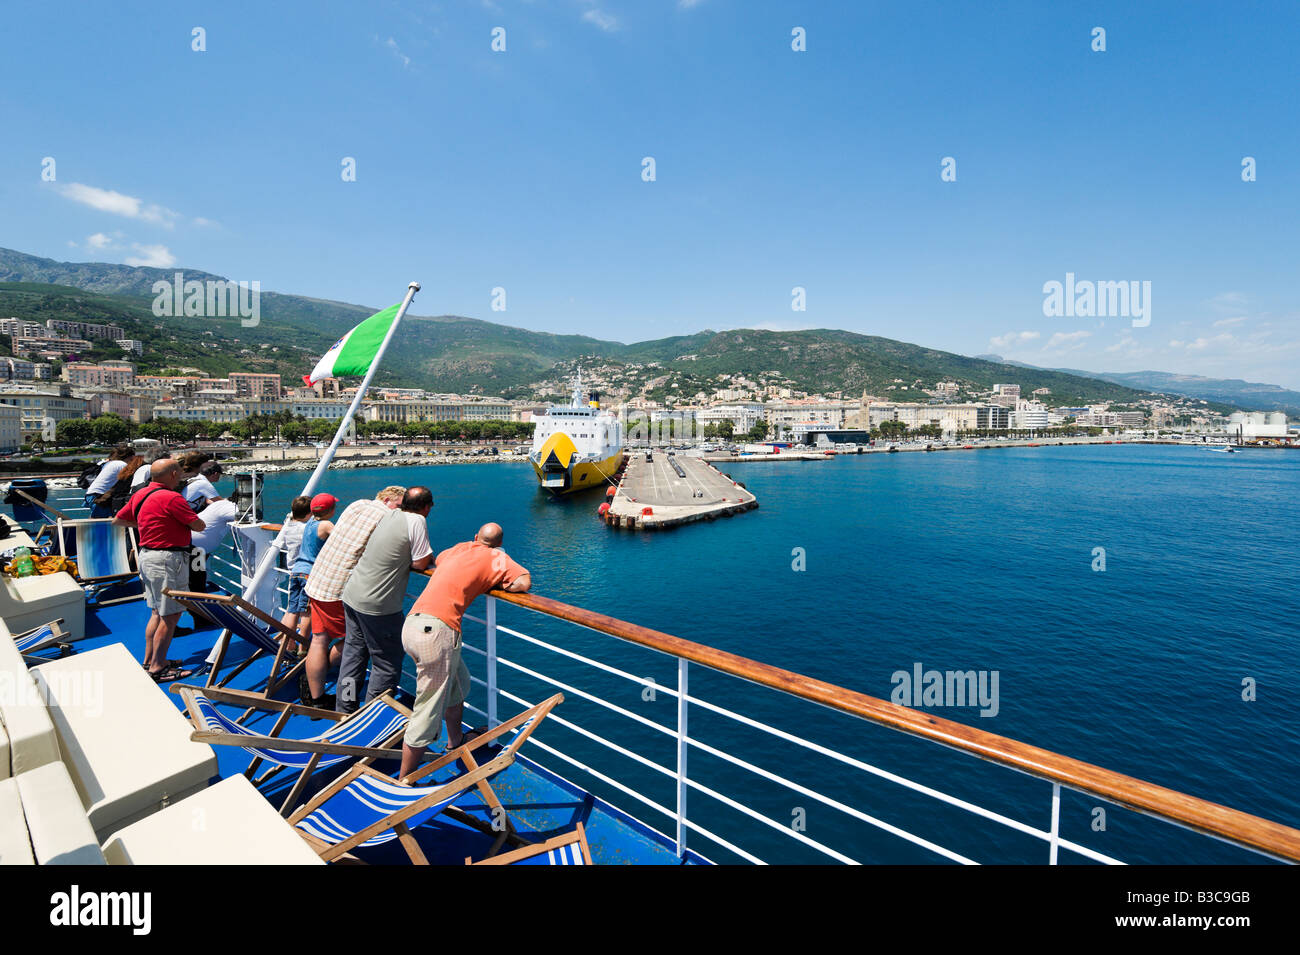 View of the port of Bastia from the deck of Moby Lines car ferry, Corsica, France Stock Photo